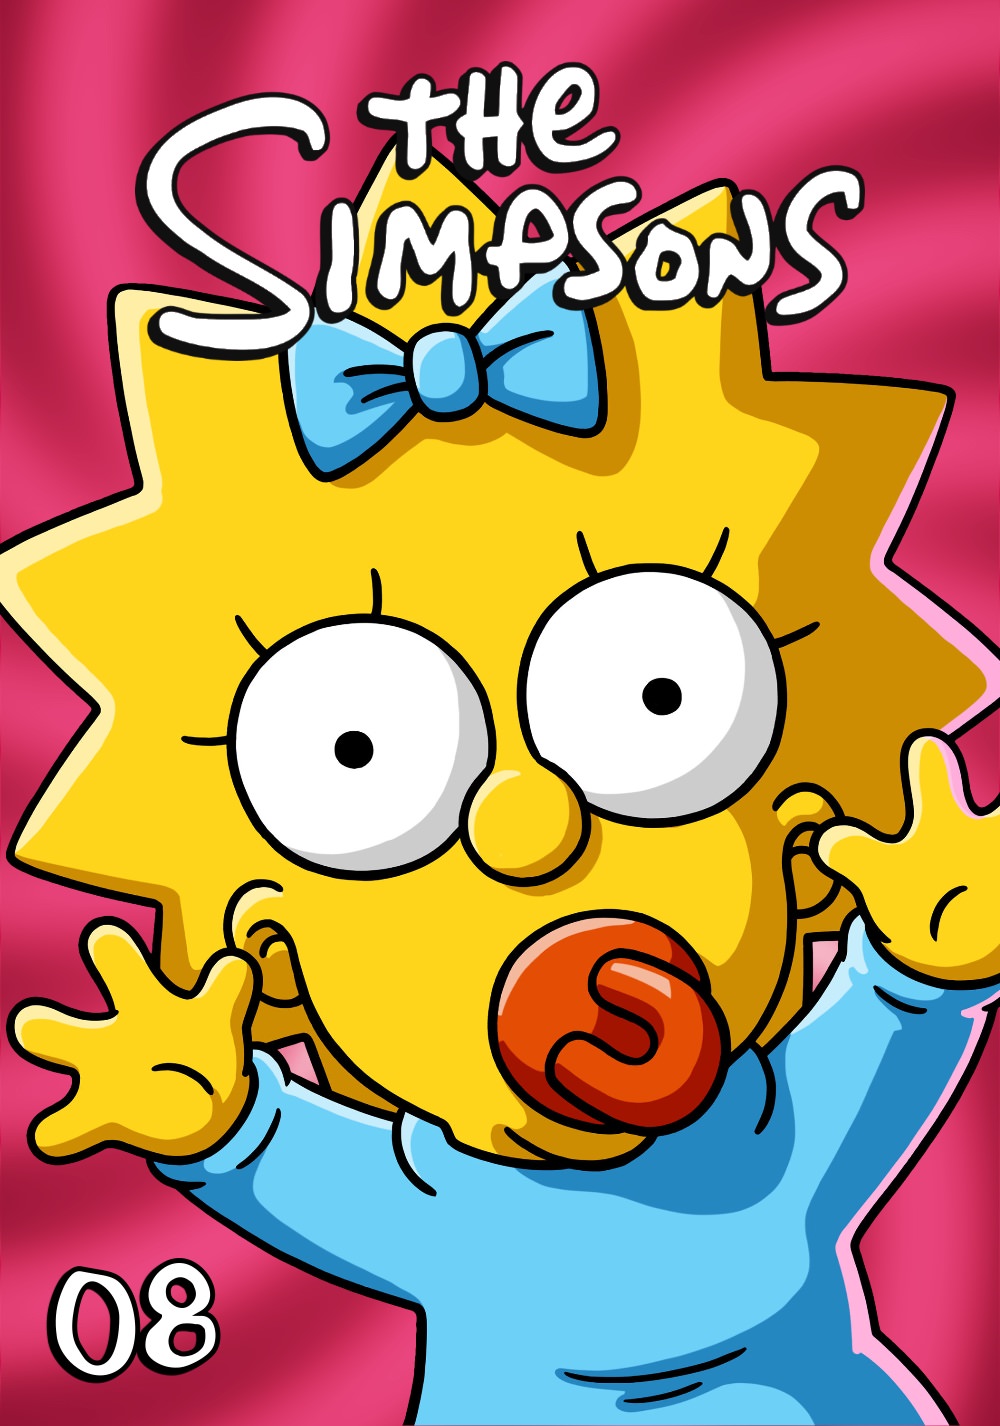 The Simpsons *Ultimate Collection* S08 (1996) BDRip 1080p HEVC 10-bit EAC3-5.1 MultiSub Retail